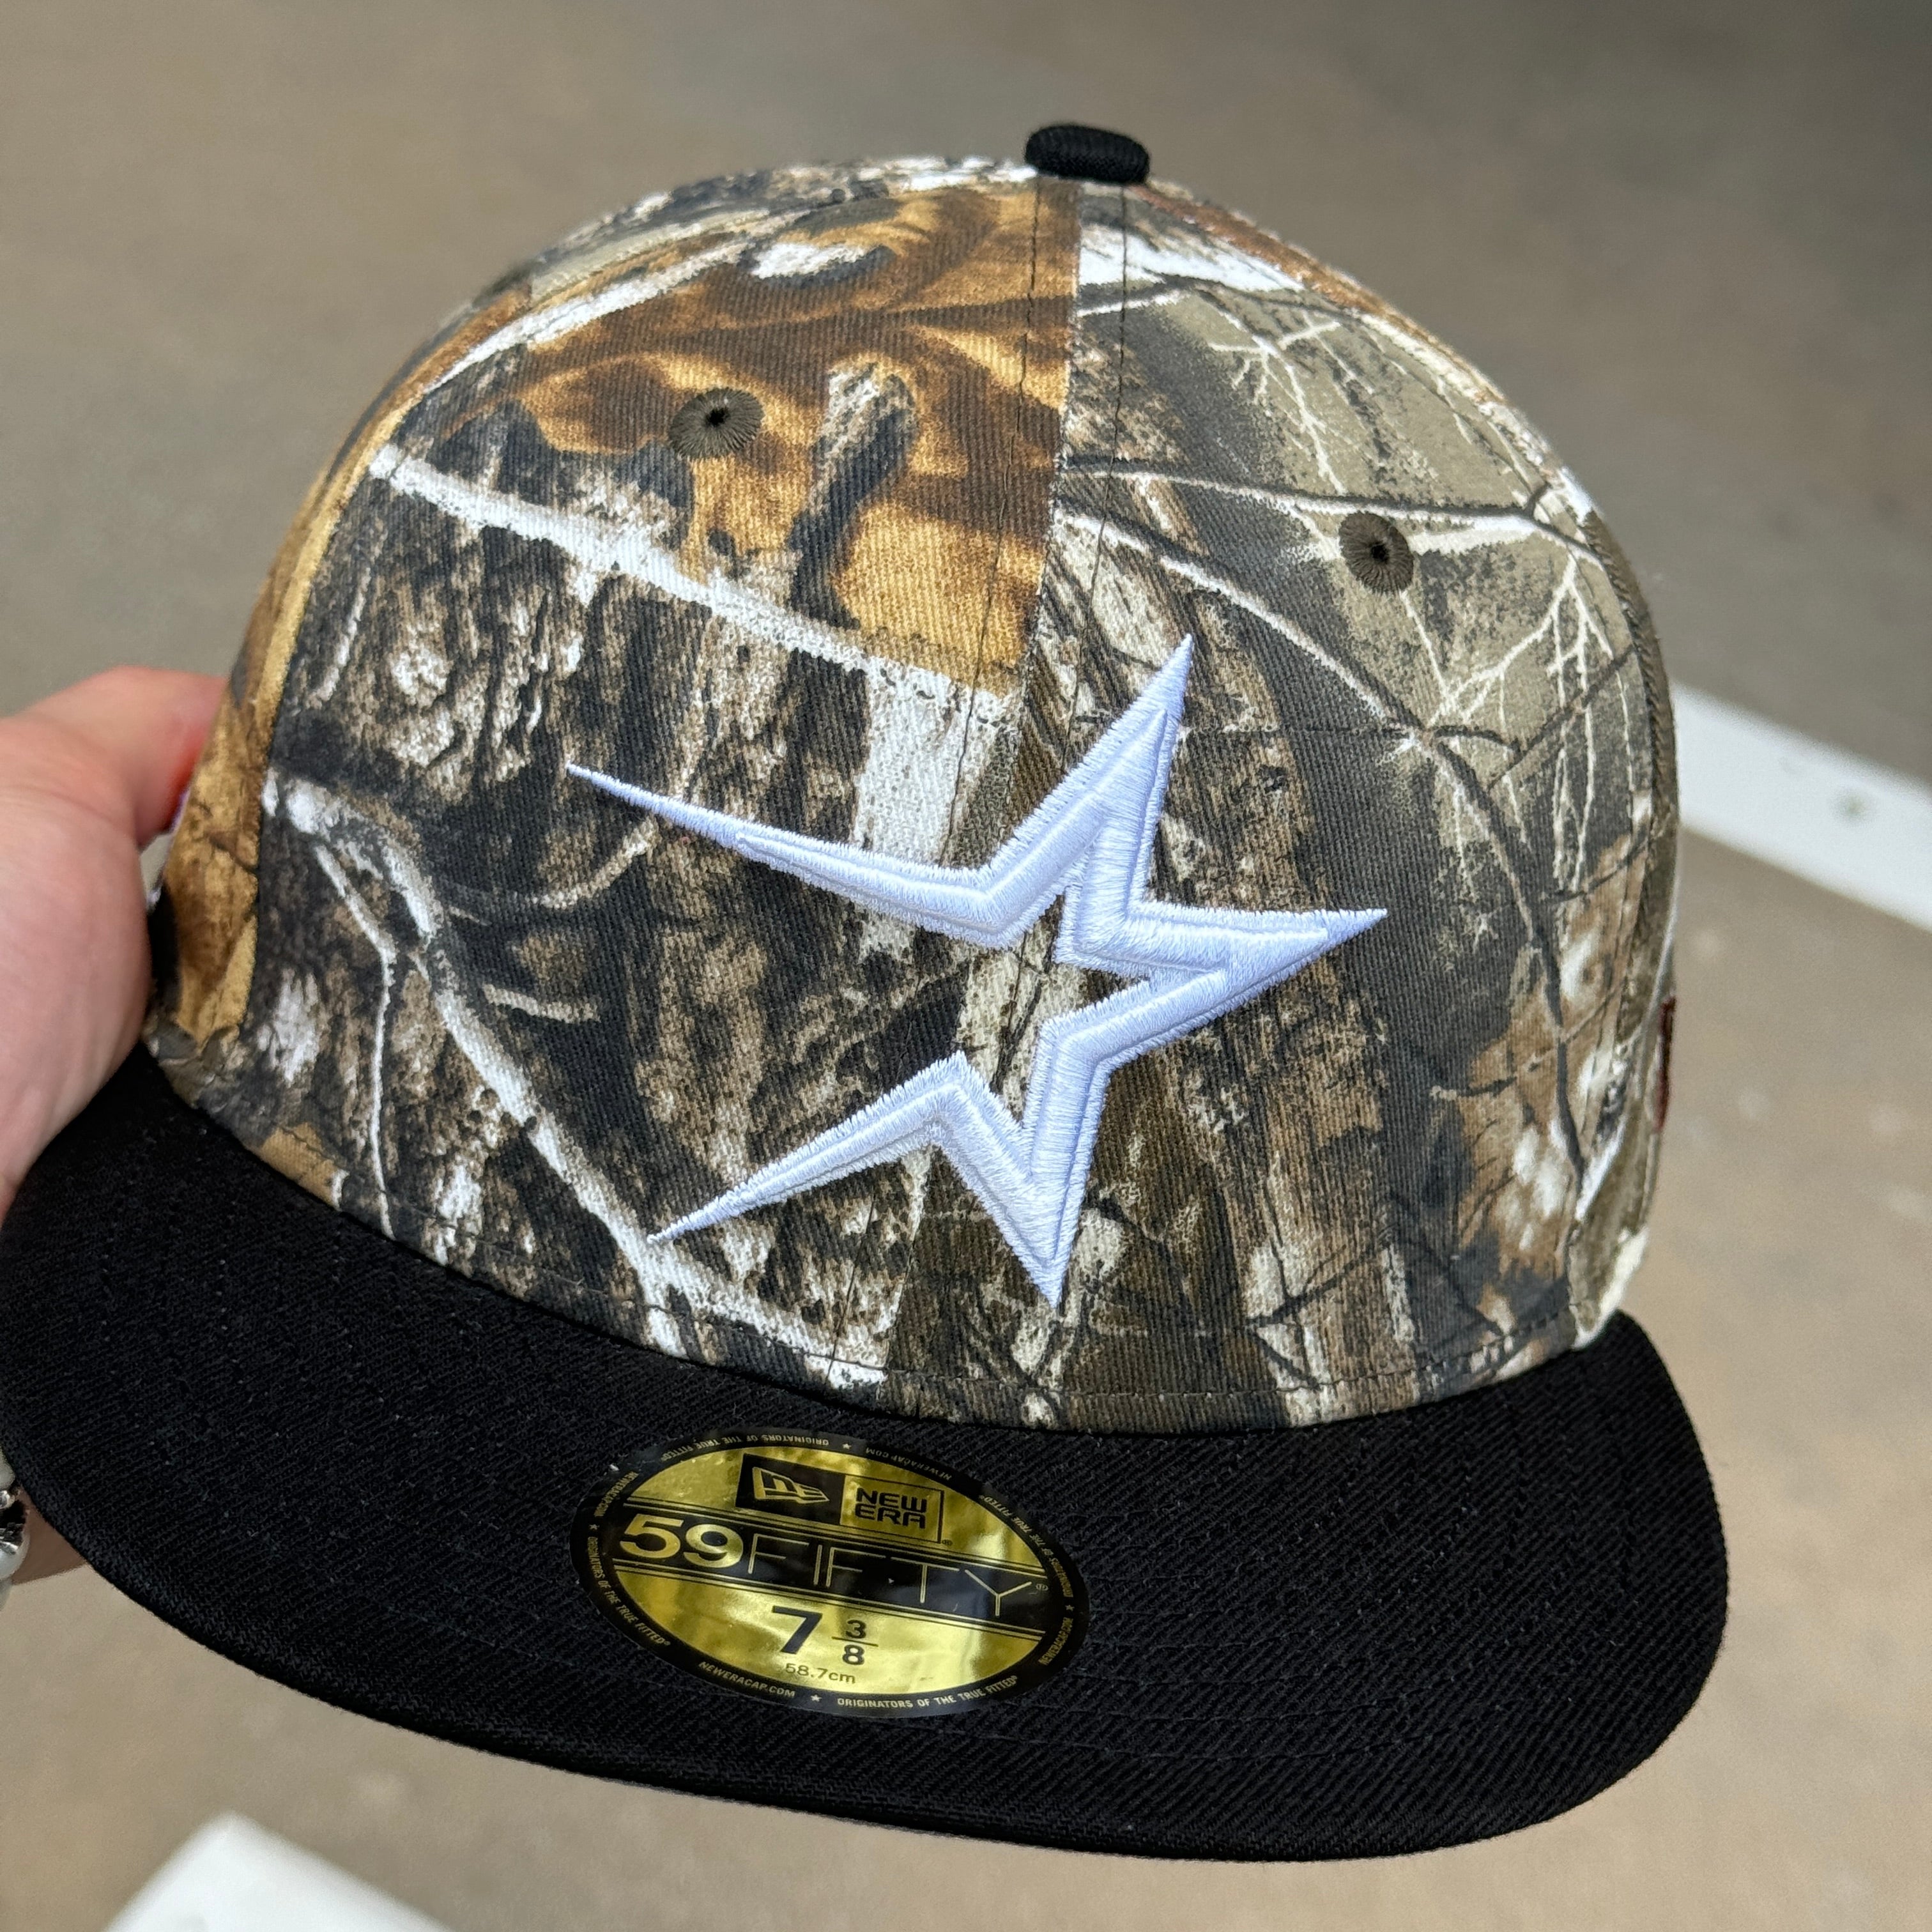 NEW 3/8 Camo Realtree Houston Astros Side Batterman 59fifty New Era Fitted Hat Cap